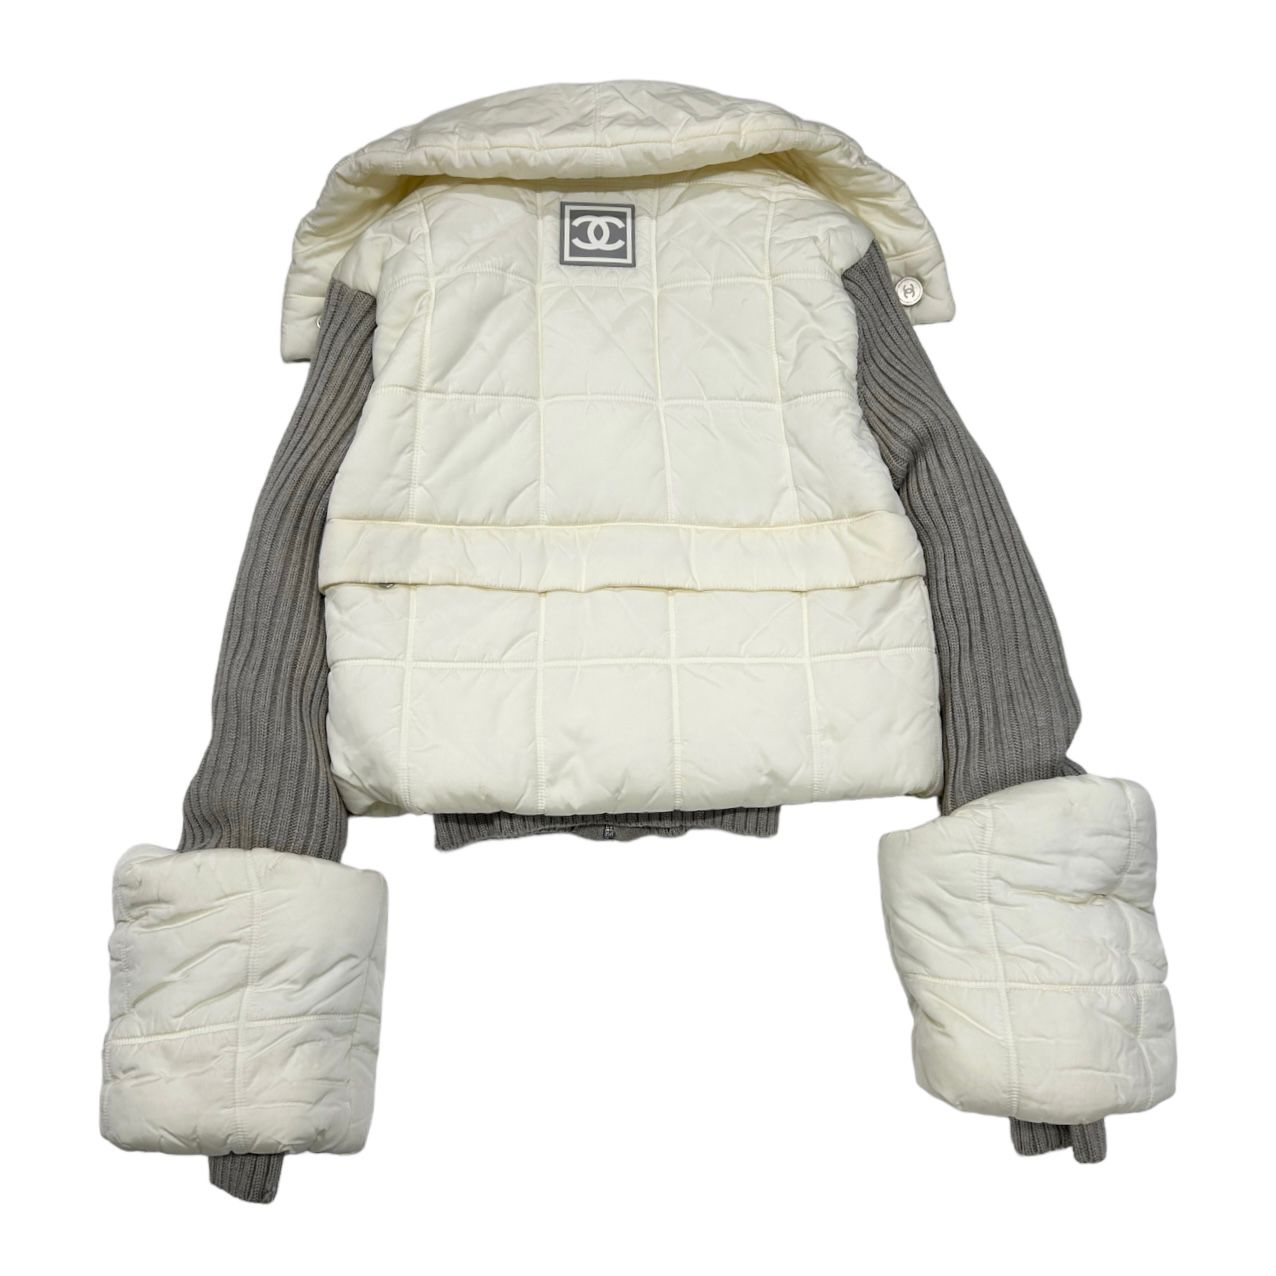 Chanel White Quilted Puffer Jacket